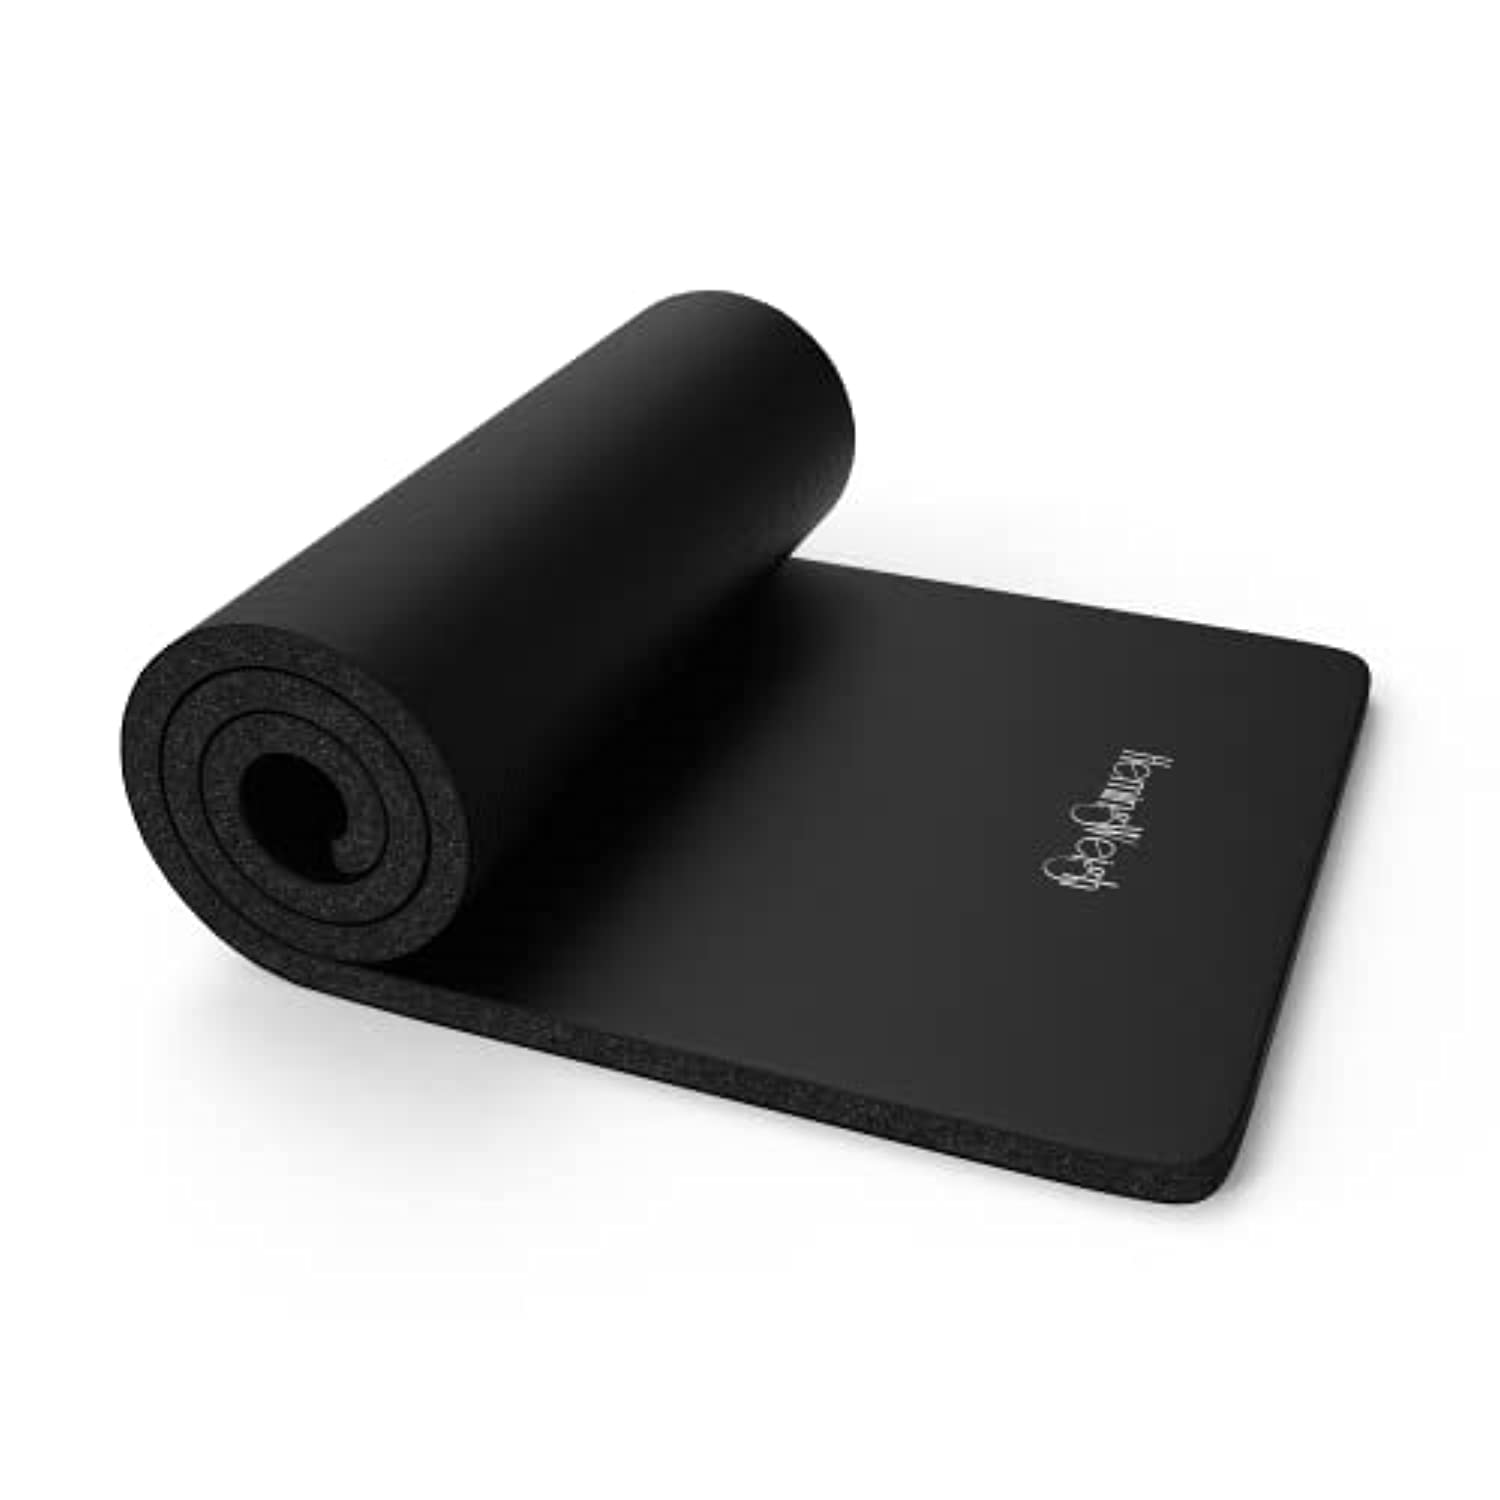 HemingWeigh 1 inch Thick Yoga Mat, Extra Thick, Non Slip Exercise Mat for Indoor and Outdoor Use, Black